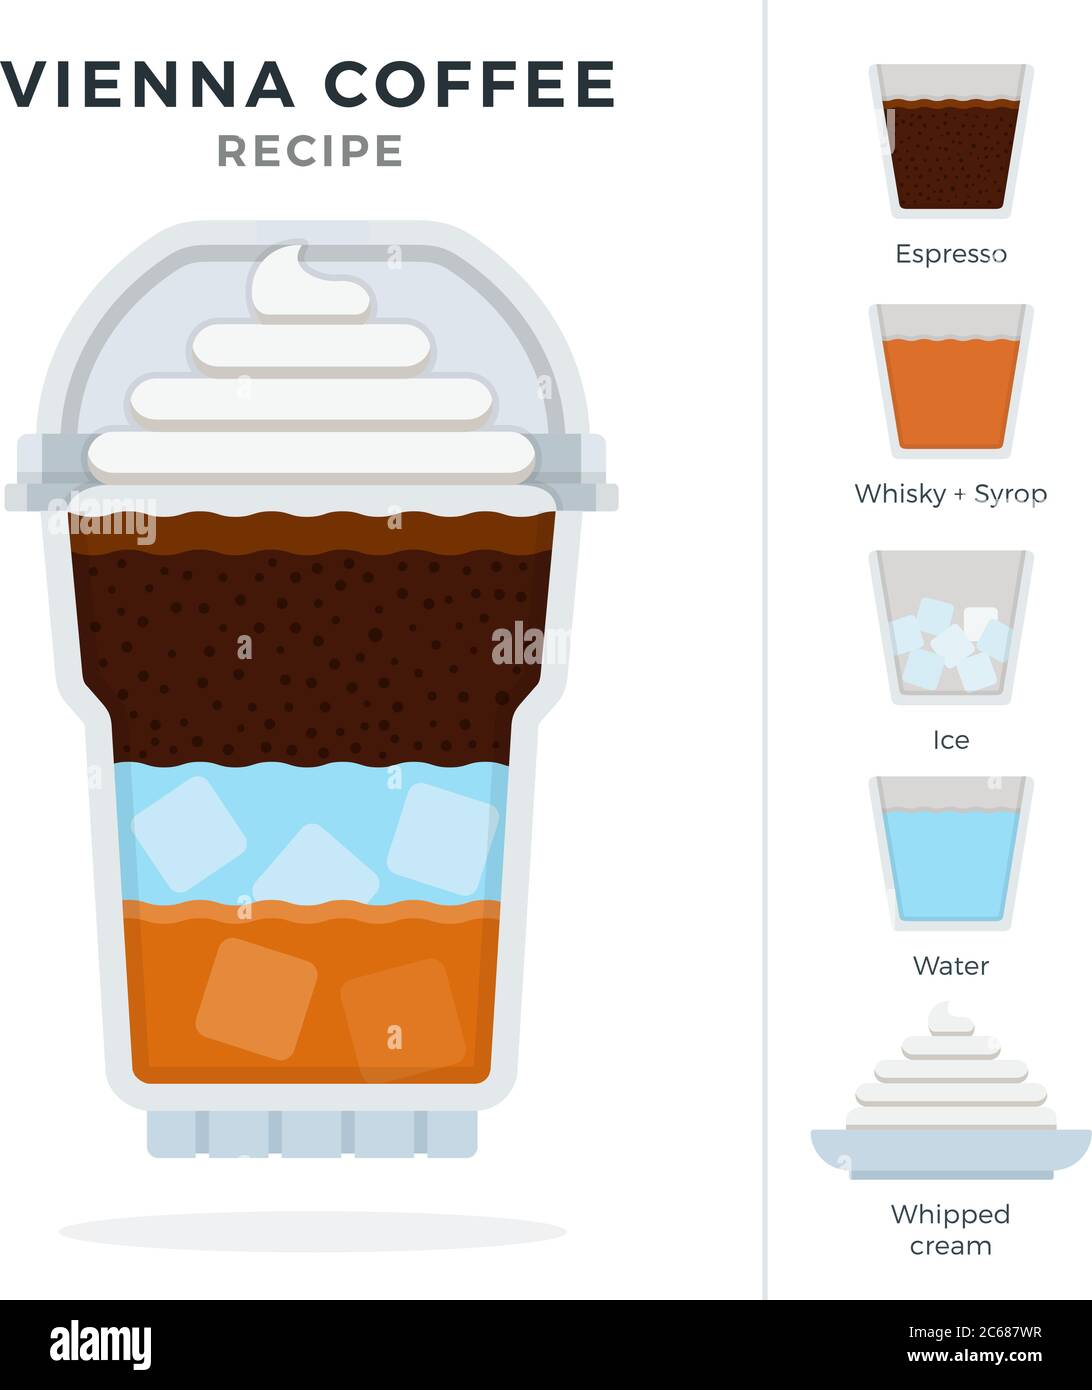 https://c8.alamy.com/comp/2C687WR/vienna-ice-coffee-recipe-in-disposable-plastic-cup-with-dome-lid-vector-flat-isolated-2C687WR.jpg